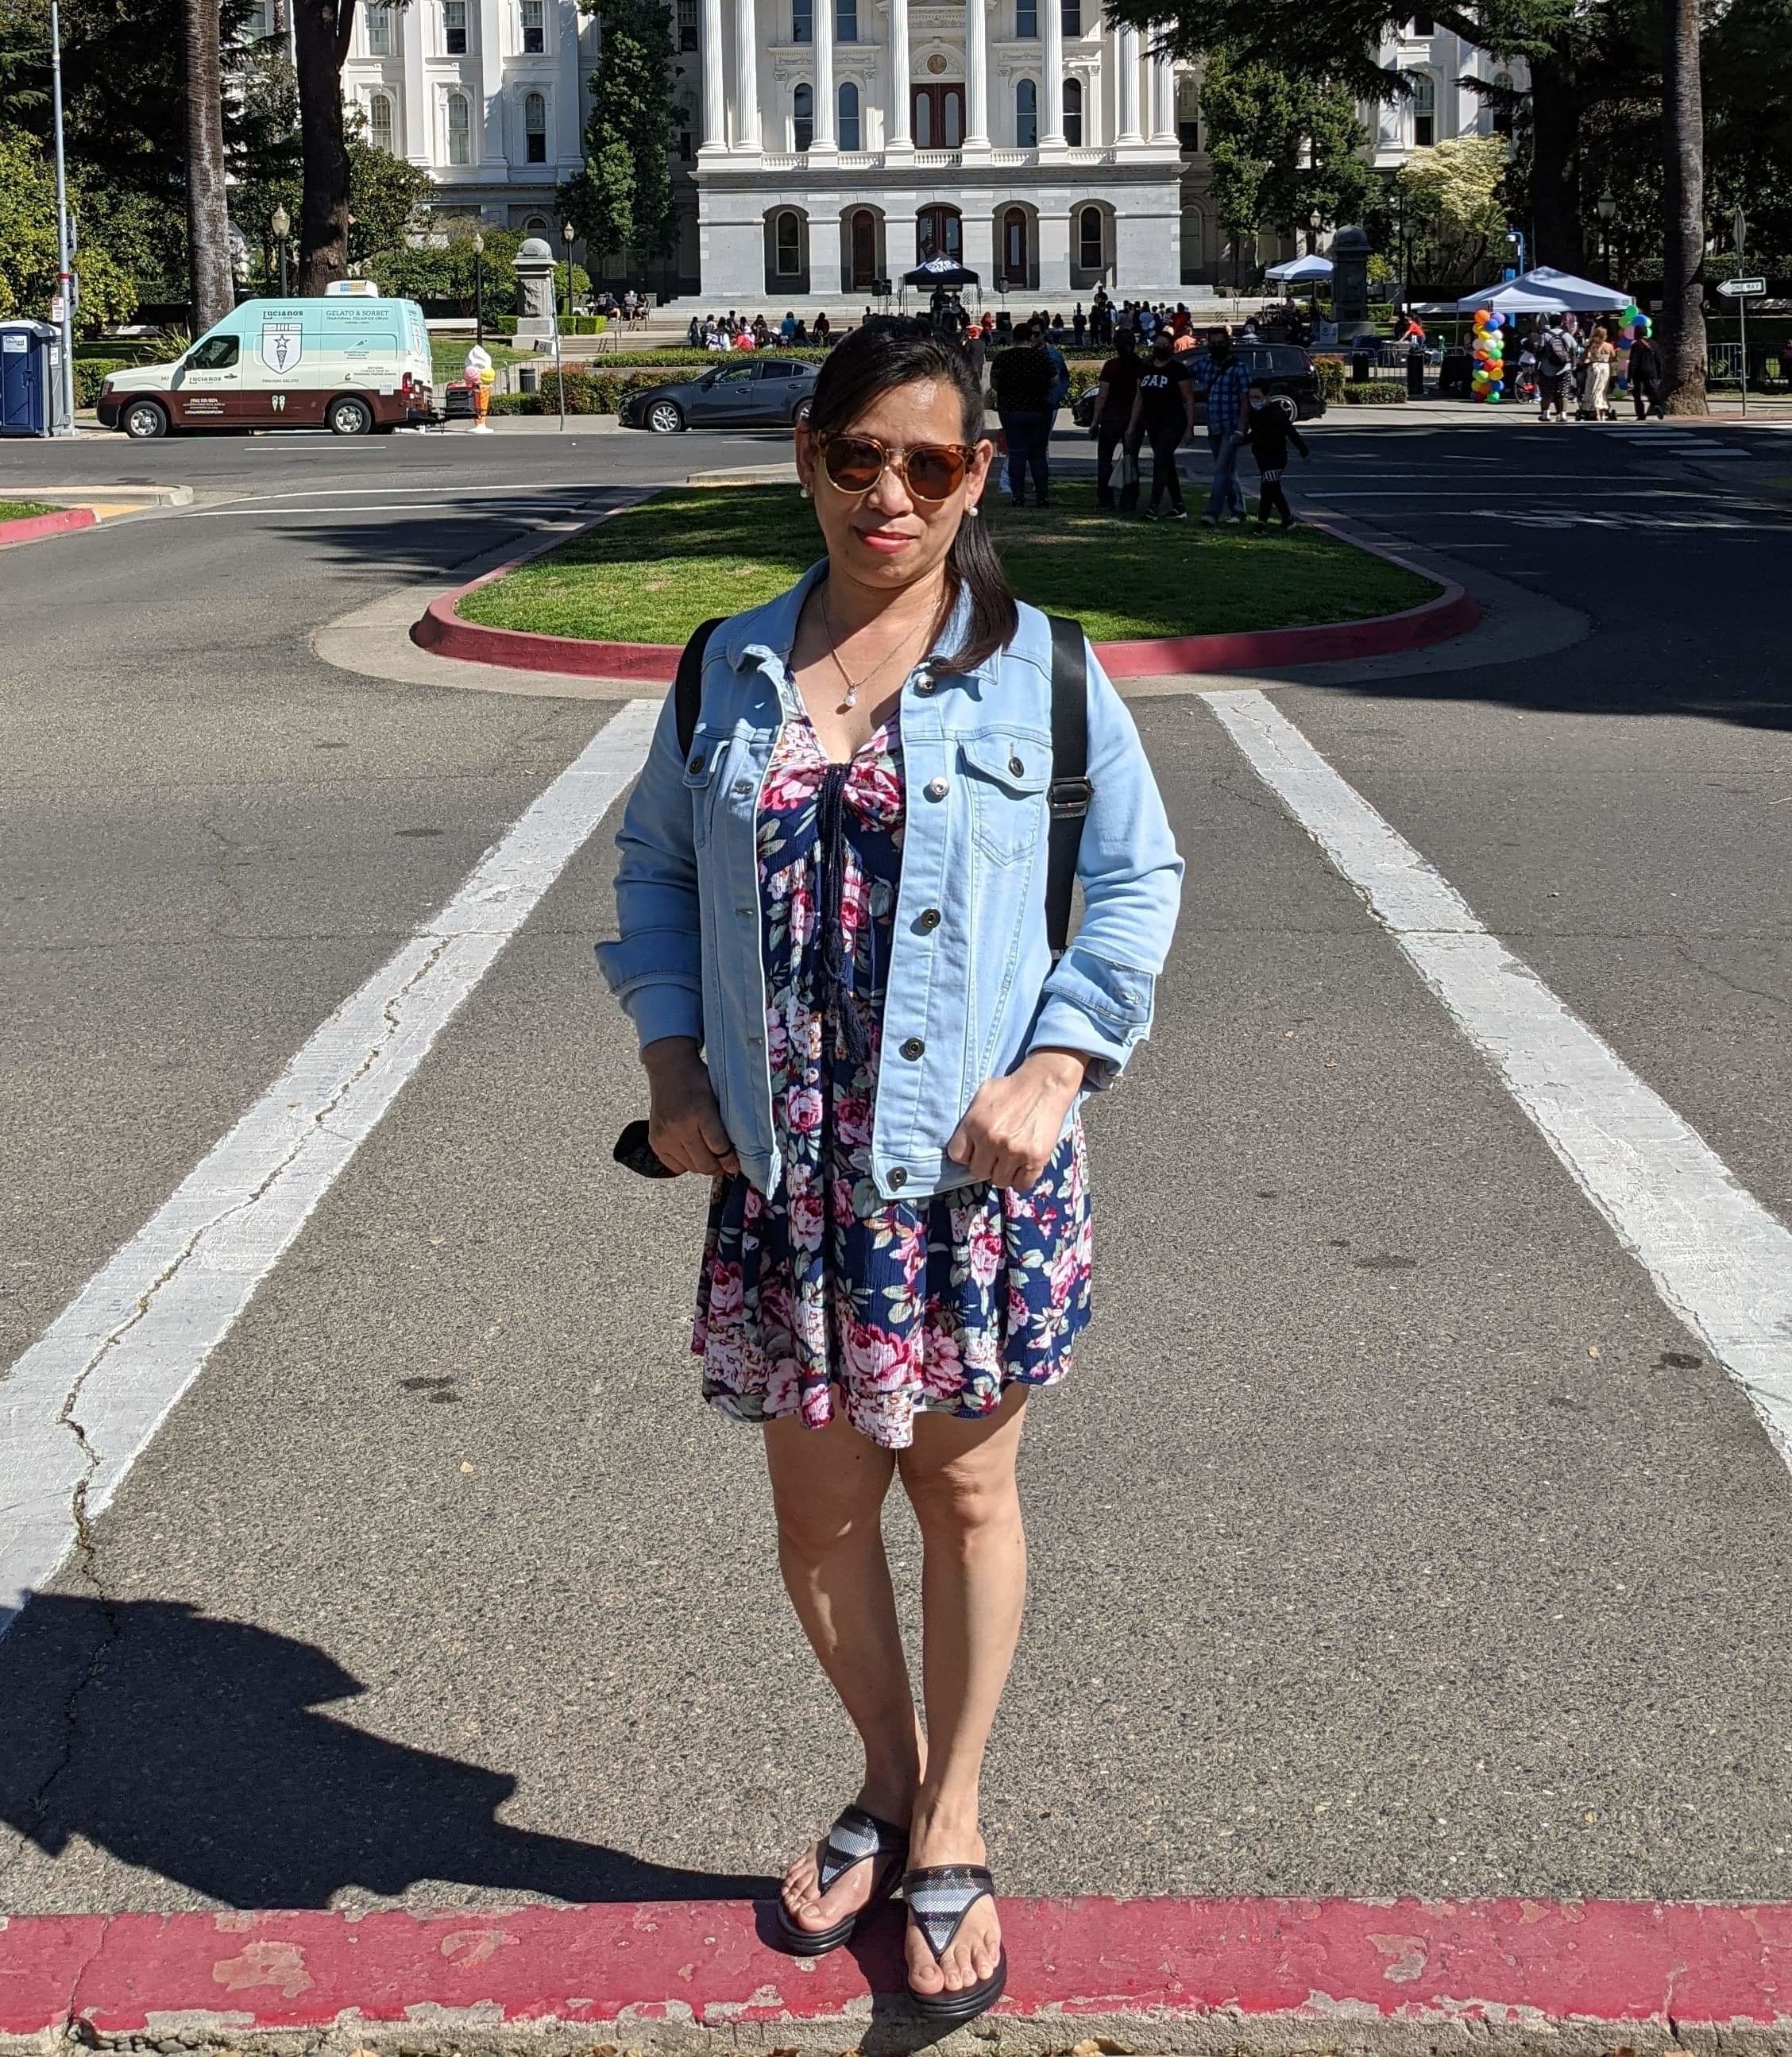 Reviewer wearing light blue jacket over dress while standing in front of legislative building